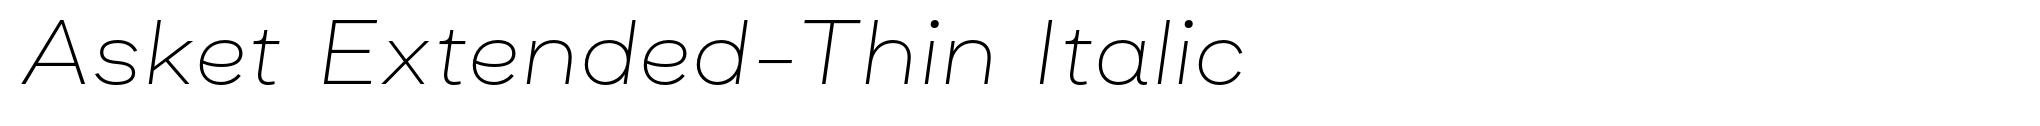 Asket Extended-Thin Italic image